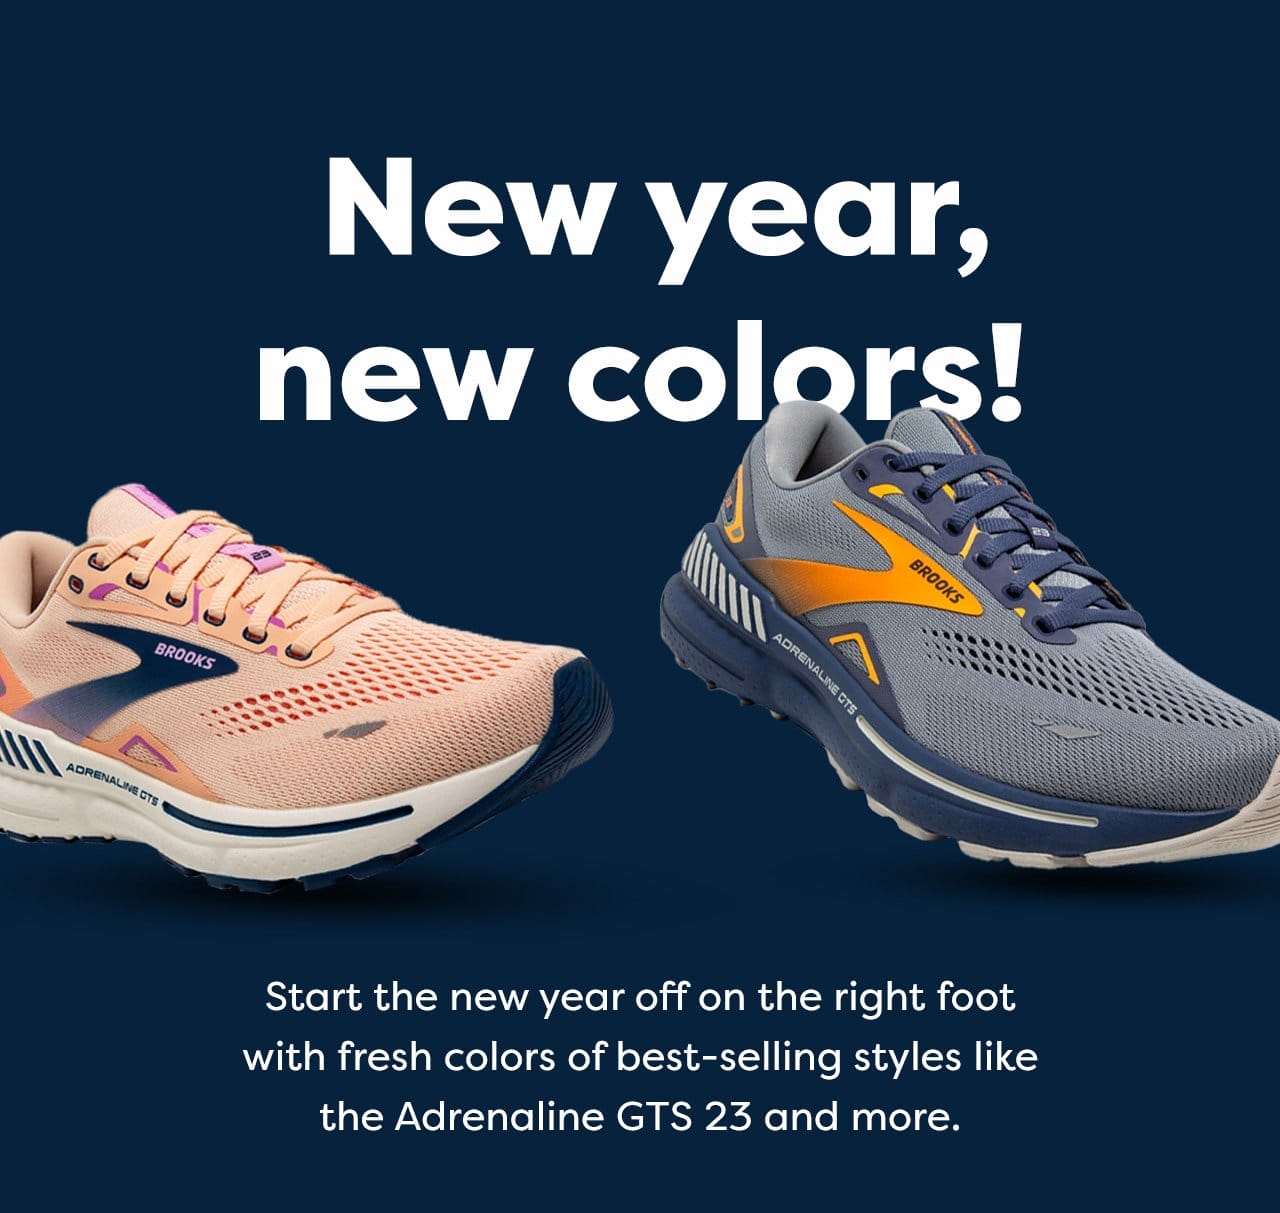 New year, new colors! - Start the new year off on the right foot with fresh colors of best-selling styles like the Adrenaline GTS 23 and more.